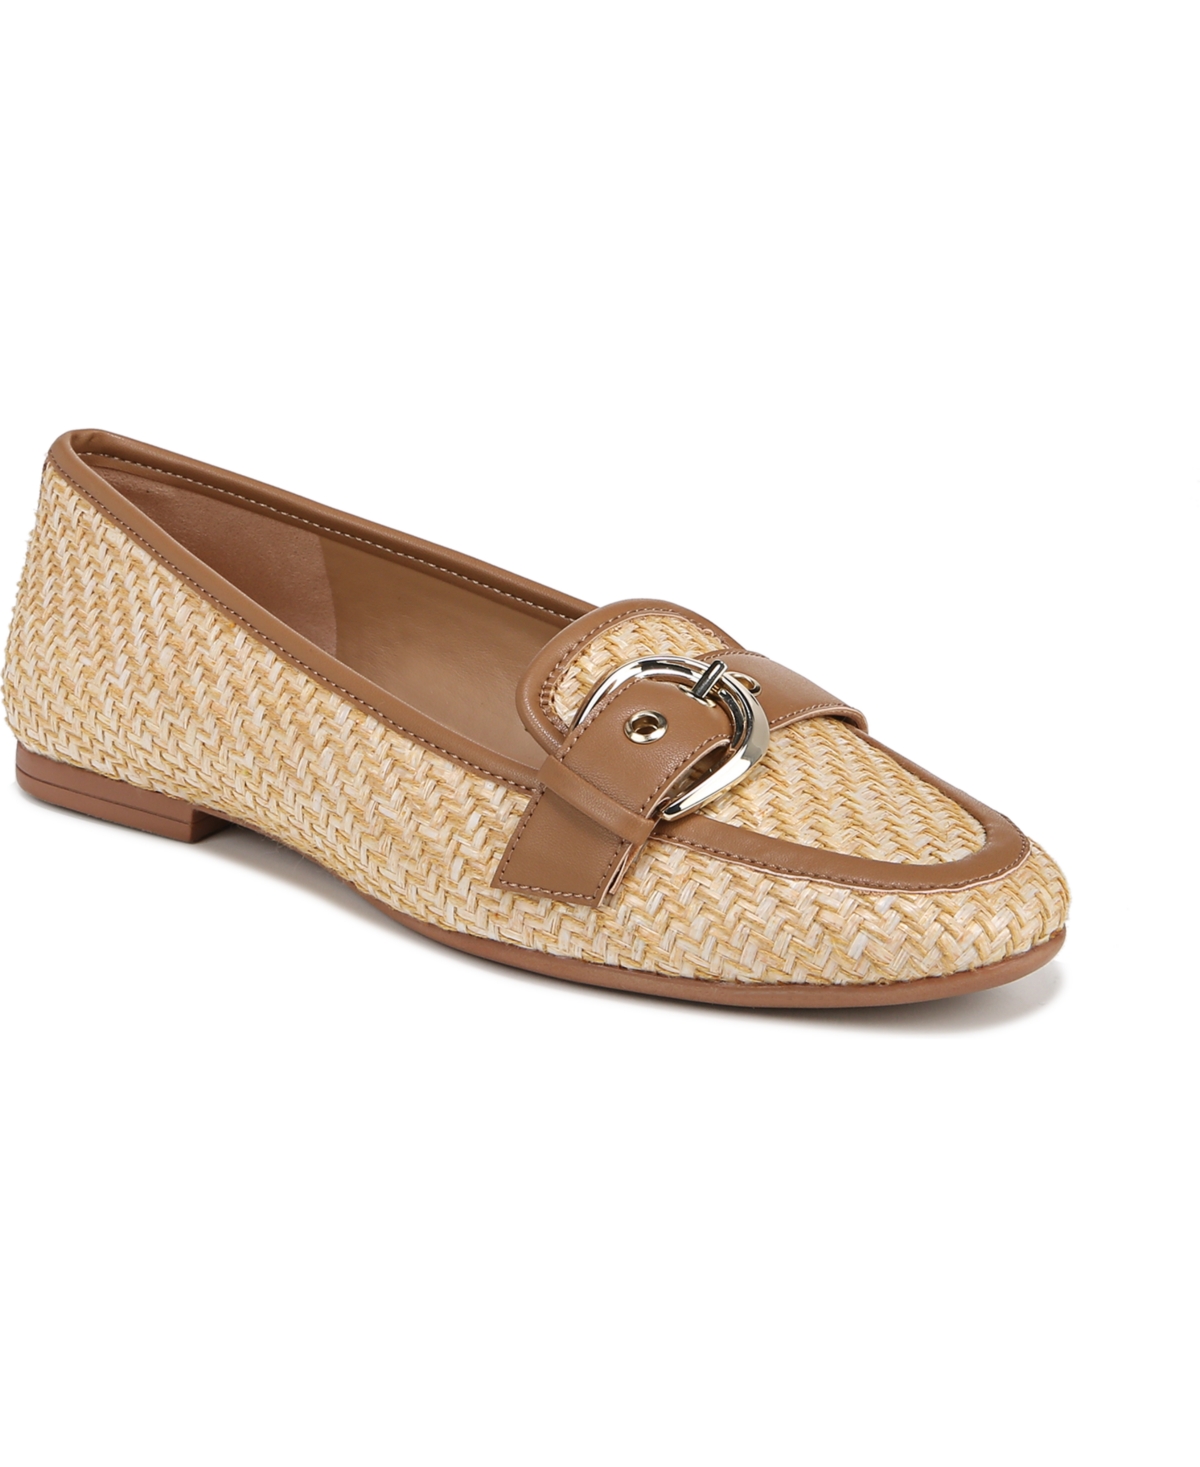 Naturalizer Lola 2 Slip-on Buckle Flats In Warm Tan Woven Straw